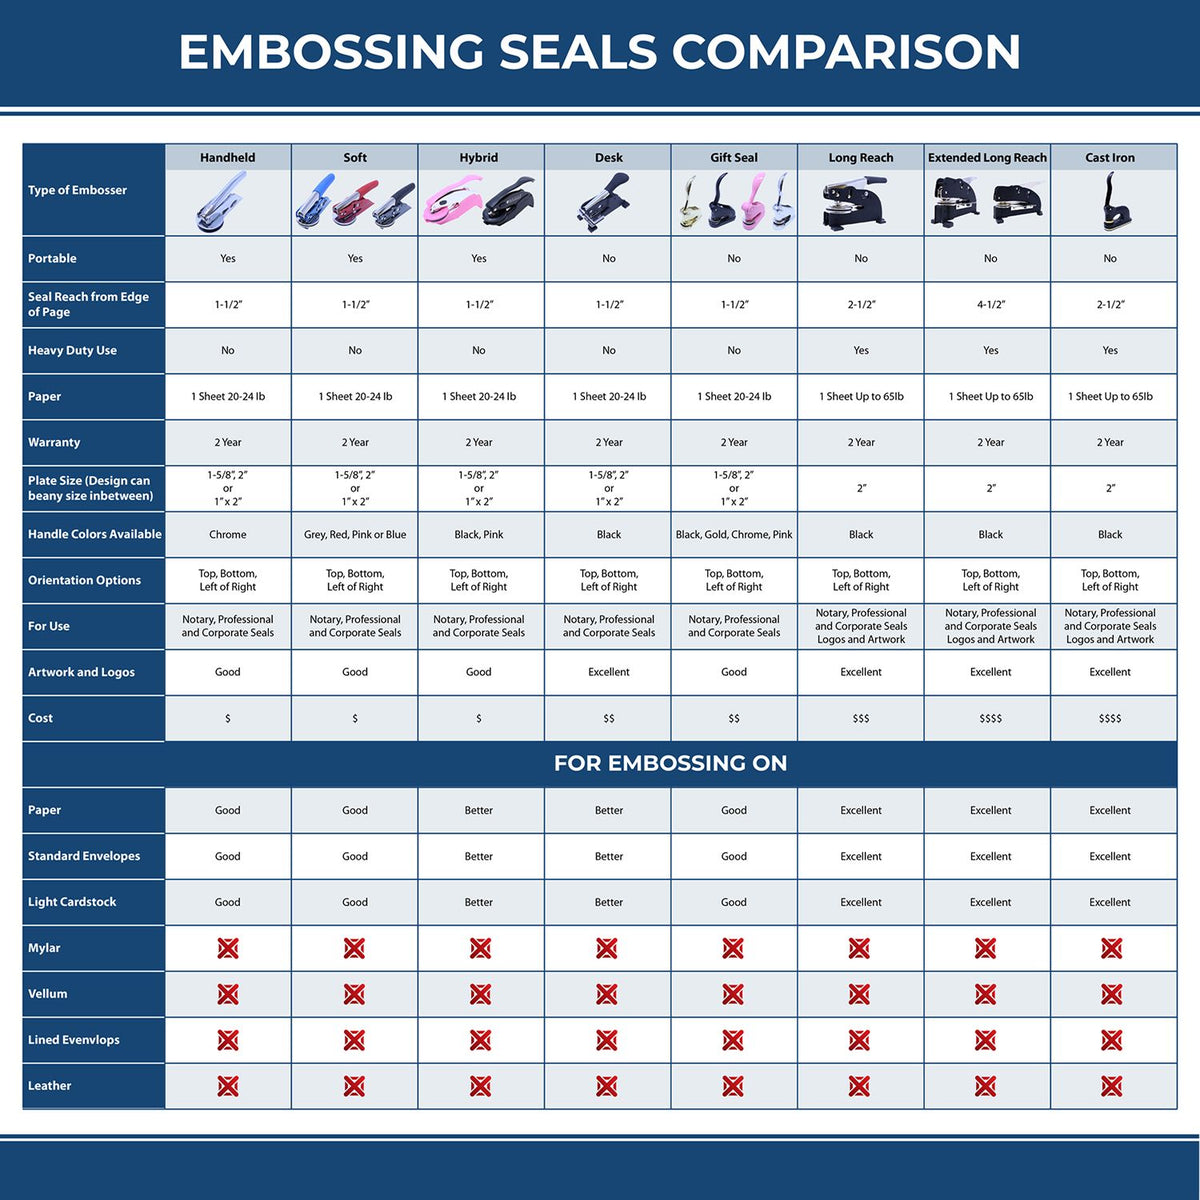 A comparison chart for the different types of mount models available for the Handheld Colorado Architect Seal Embosser.